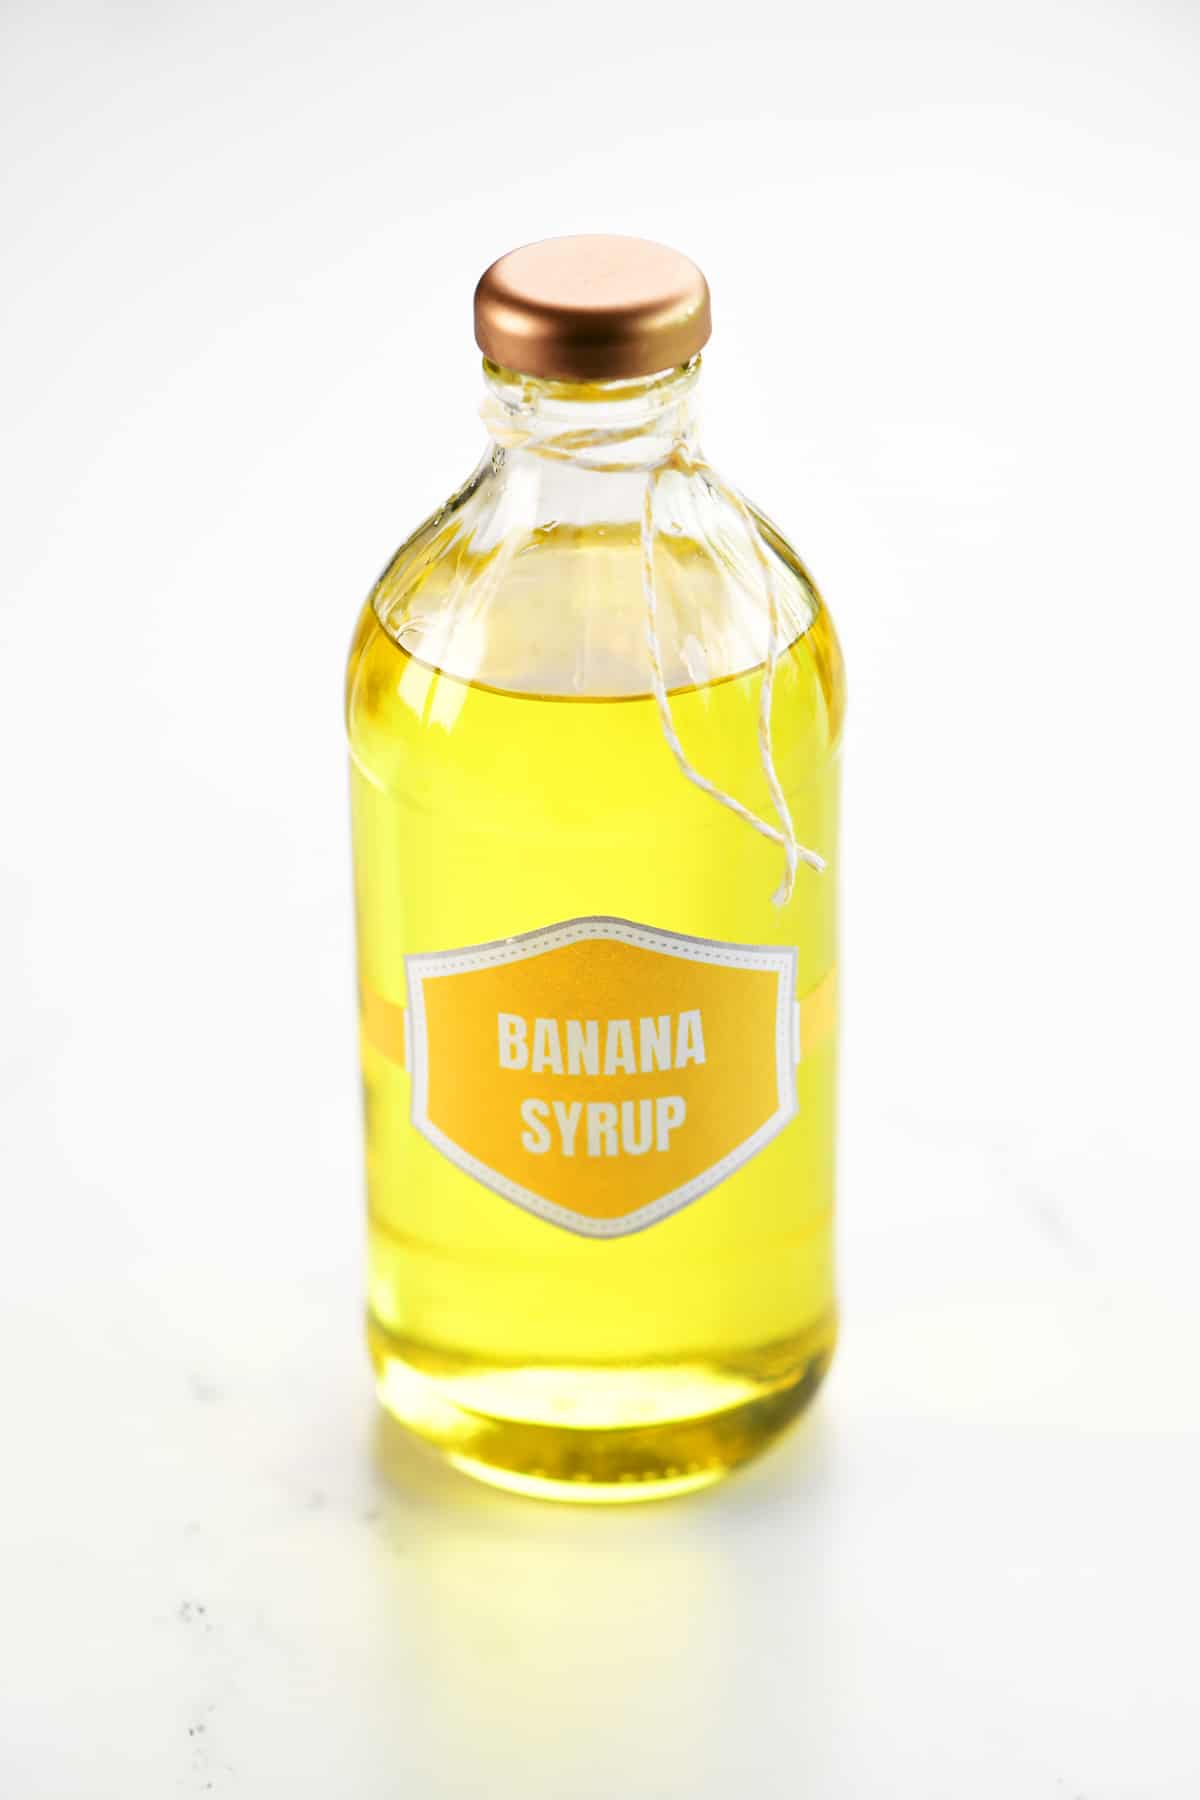 Banana syrup in a labeled bottle.